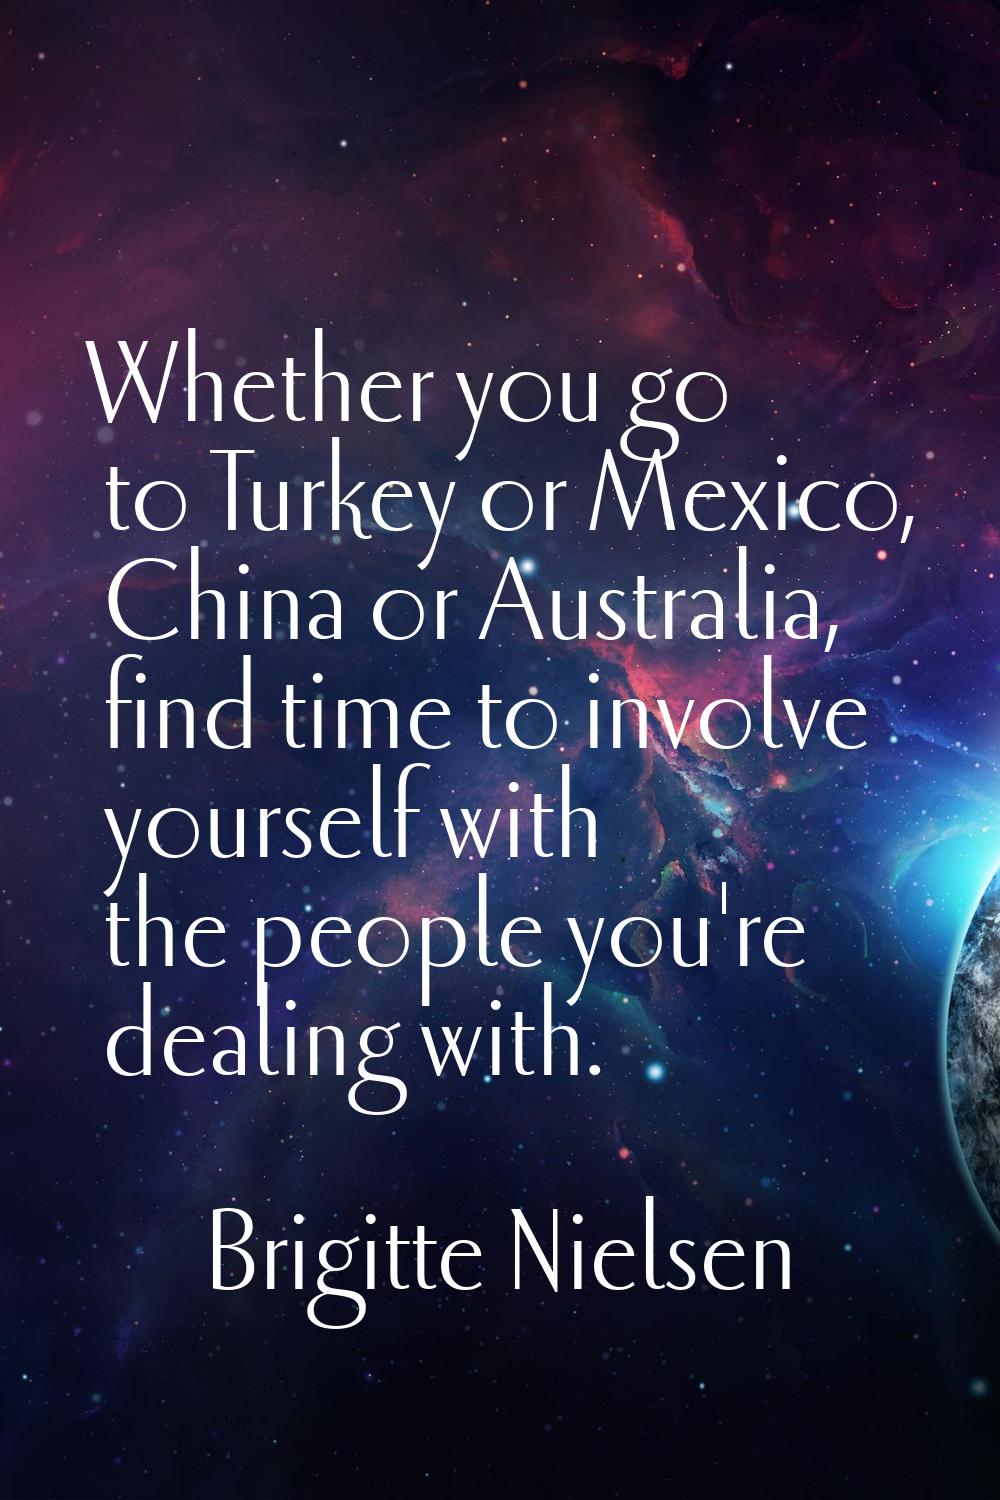 Whether you go to Turkey or Mexico, China or Australia, find time to involve yourself with the peop